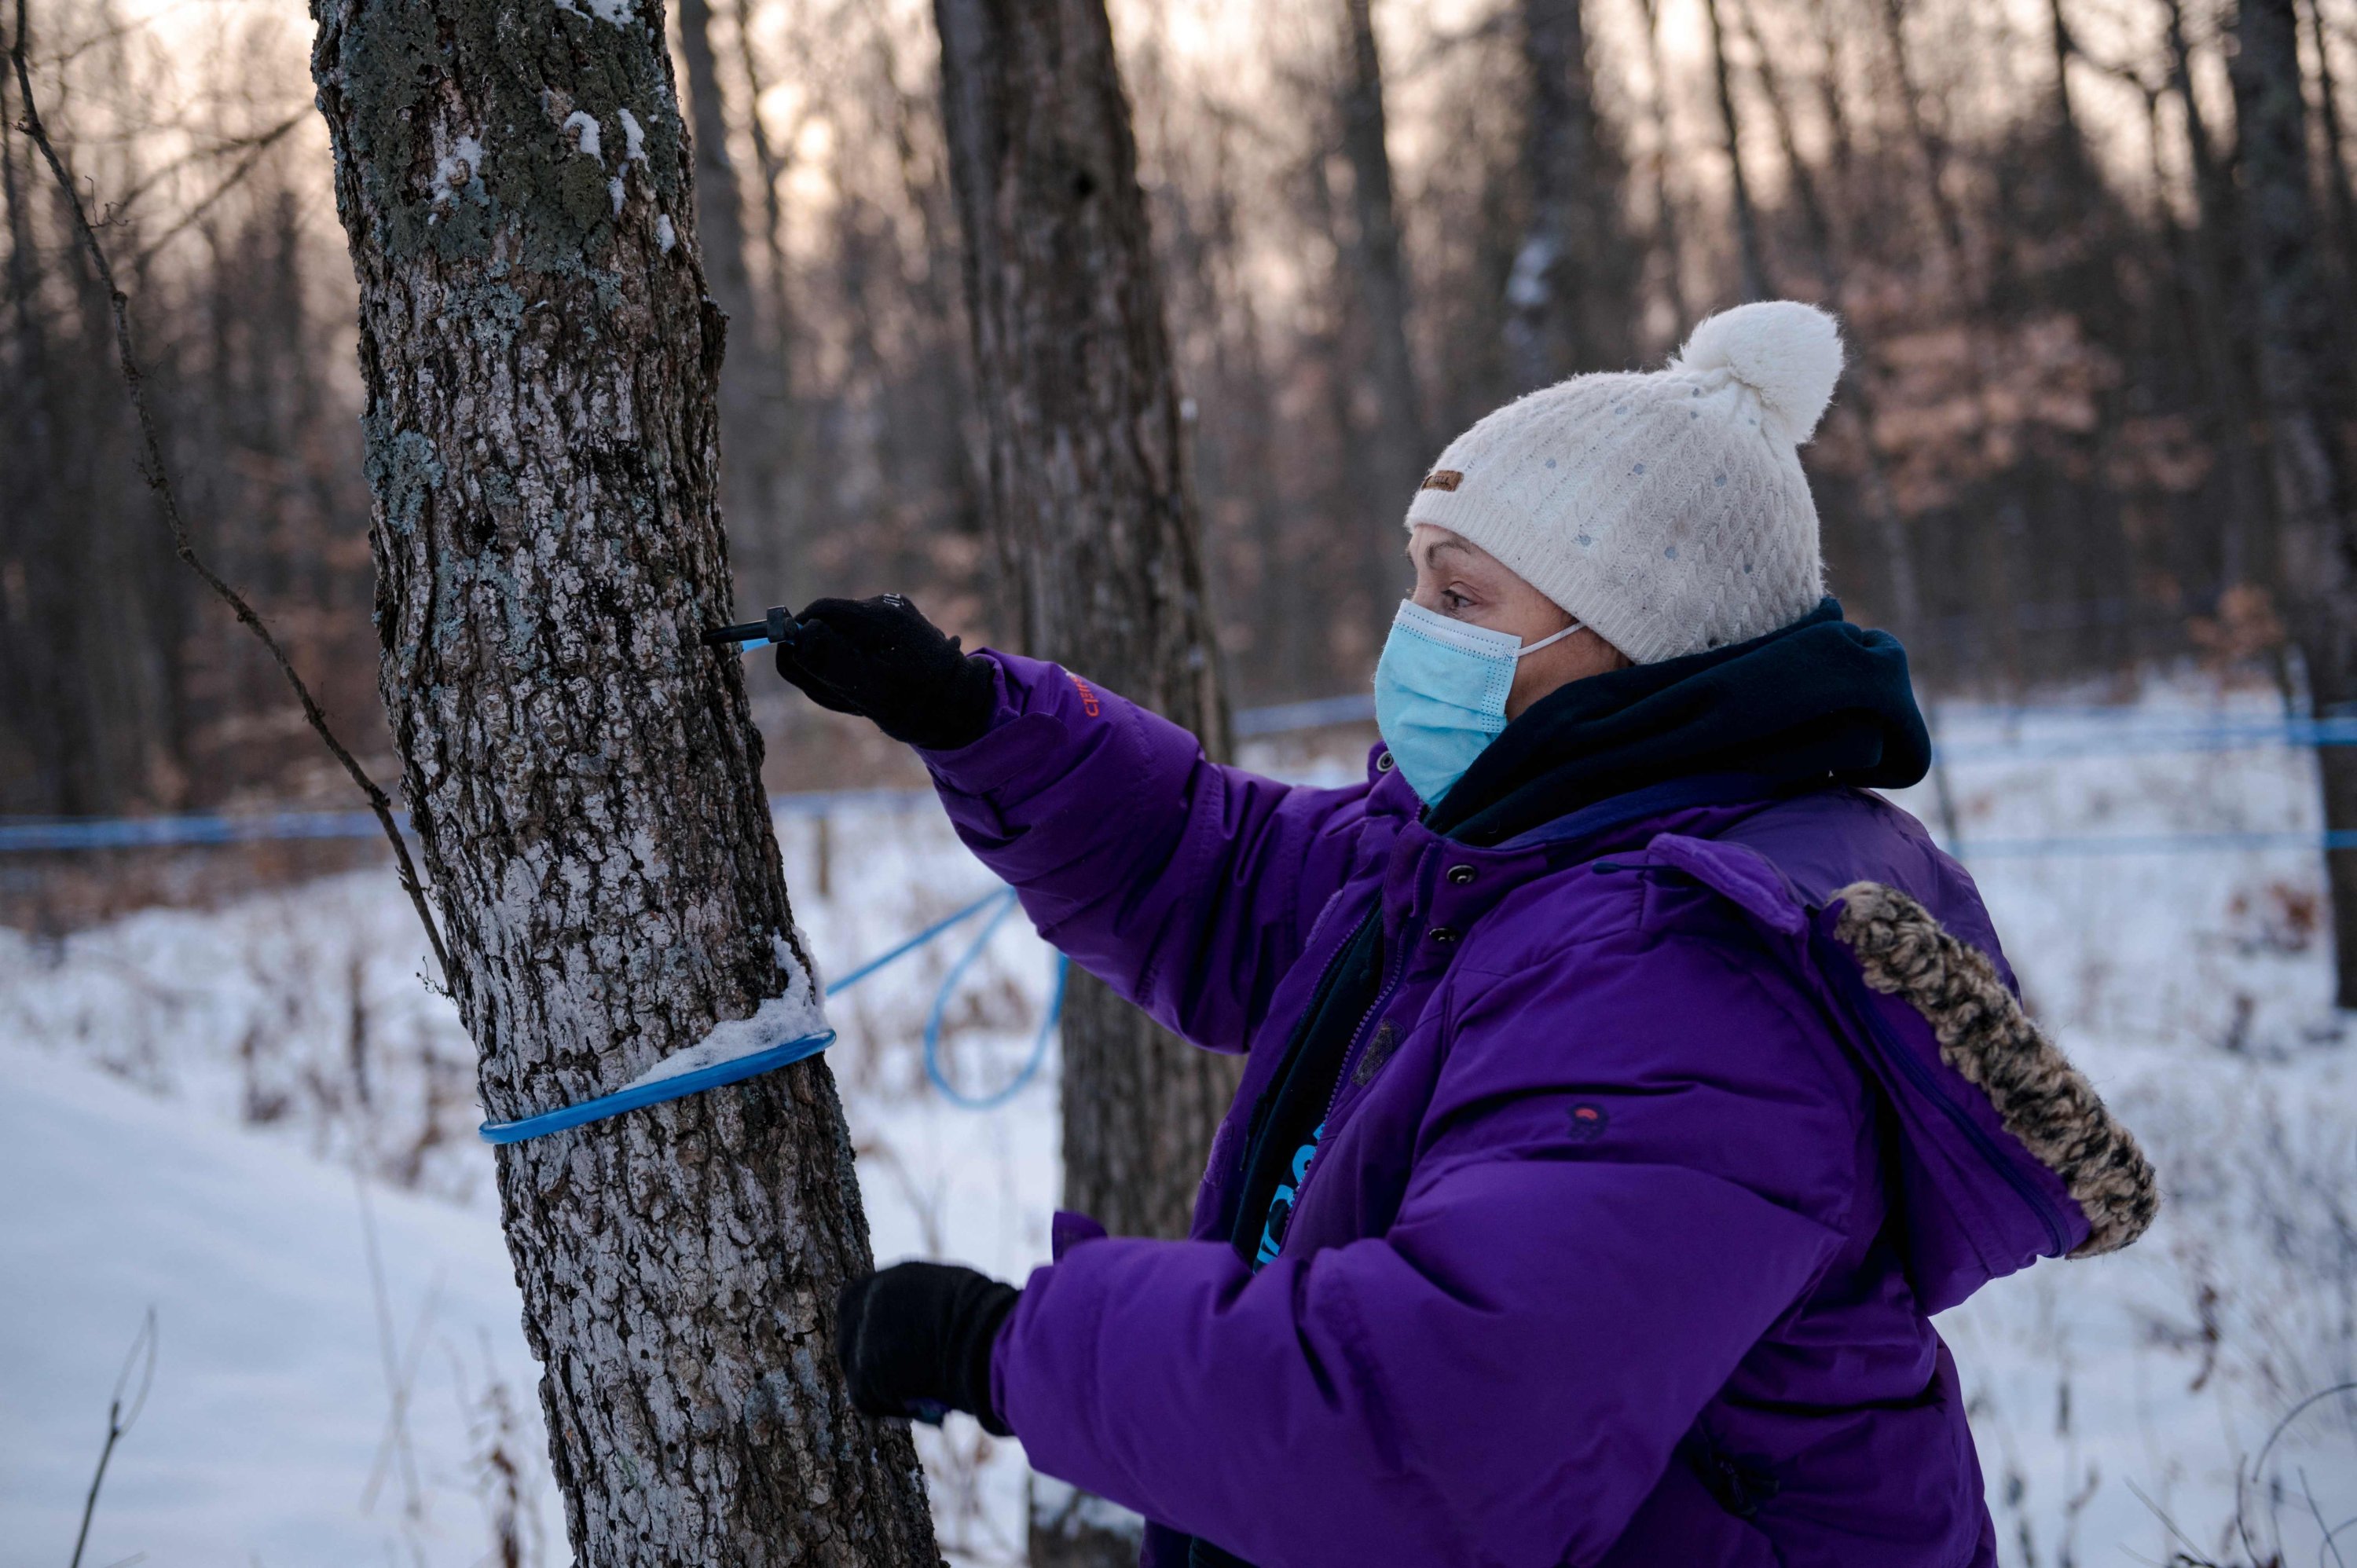 Maryse Nault demonstrates how she taps a maple tree to collect the sap at the Belfontaine Holstein farm Saint-Marc-sur-Richelieu, Quebec, Canada, Dec. 9, 2021. (AFP Photo)